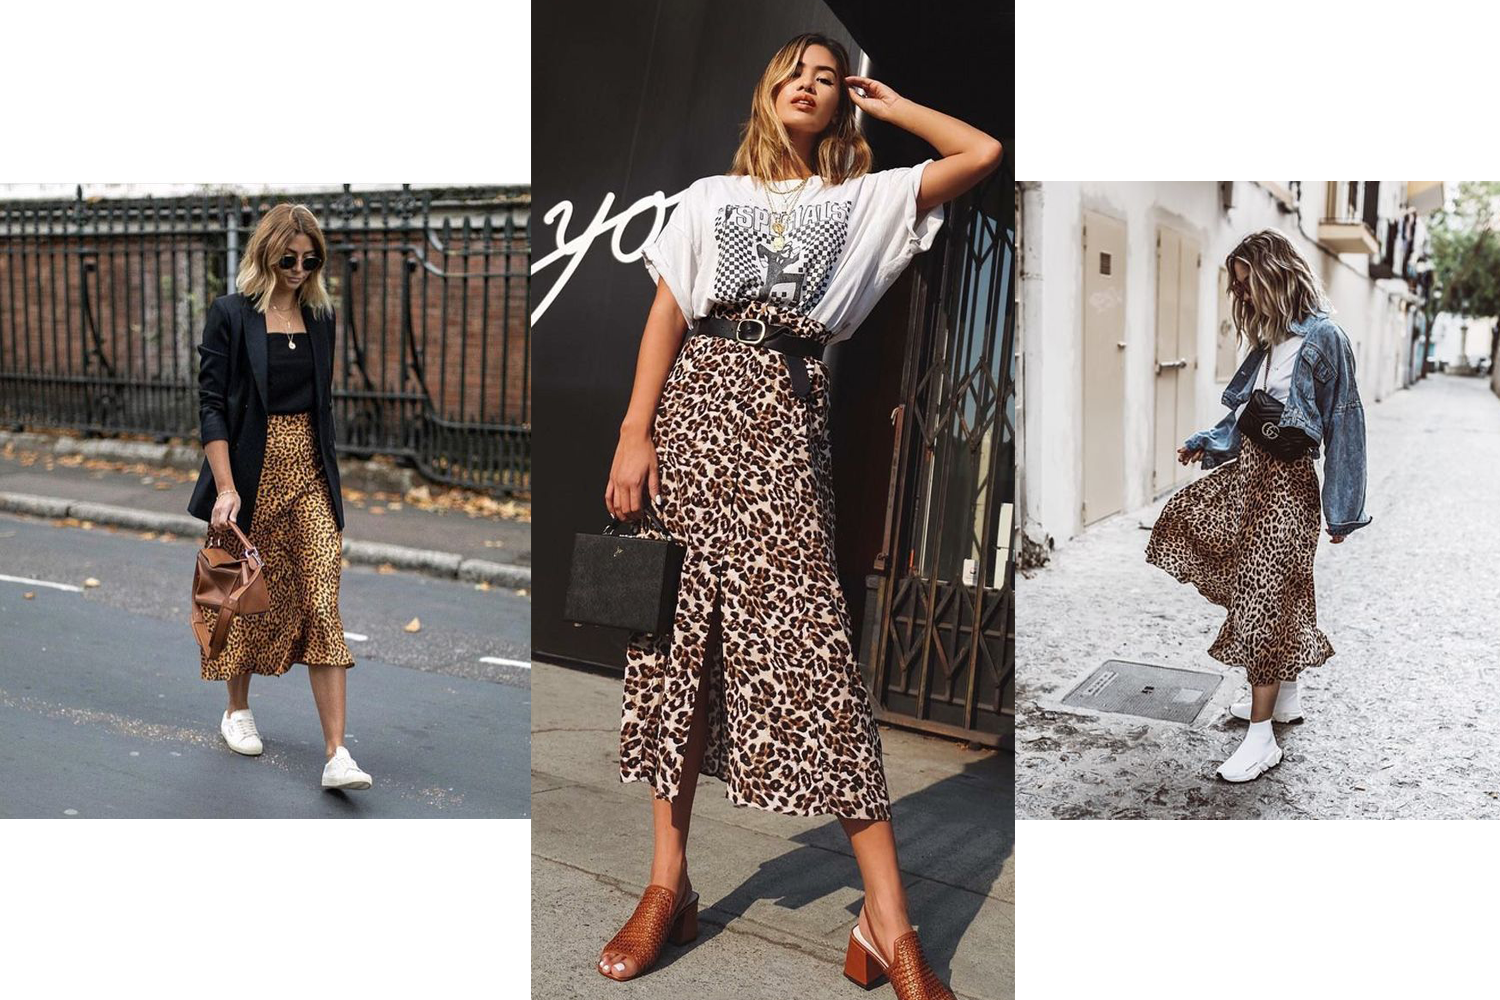 how to style a leopard skirt midi length  See Anna Jane  Leopard print  skirt outfit Animal print skirt outfit Leopard print skirt